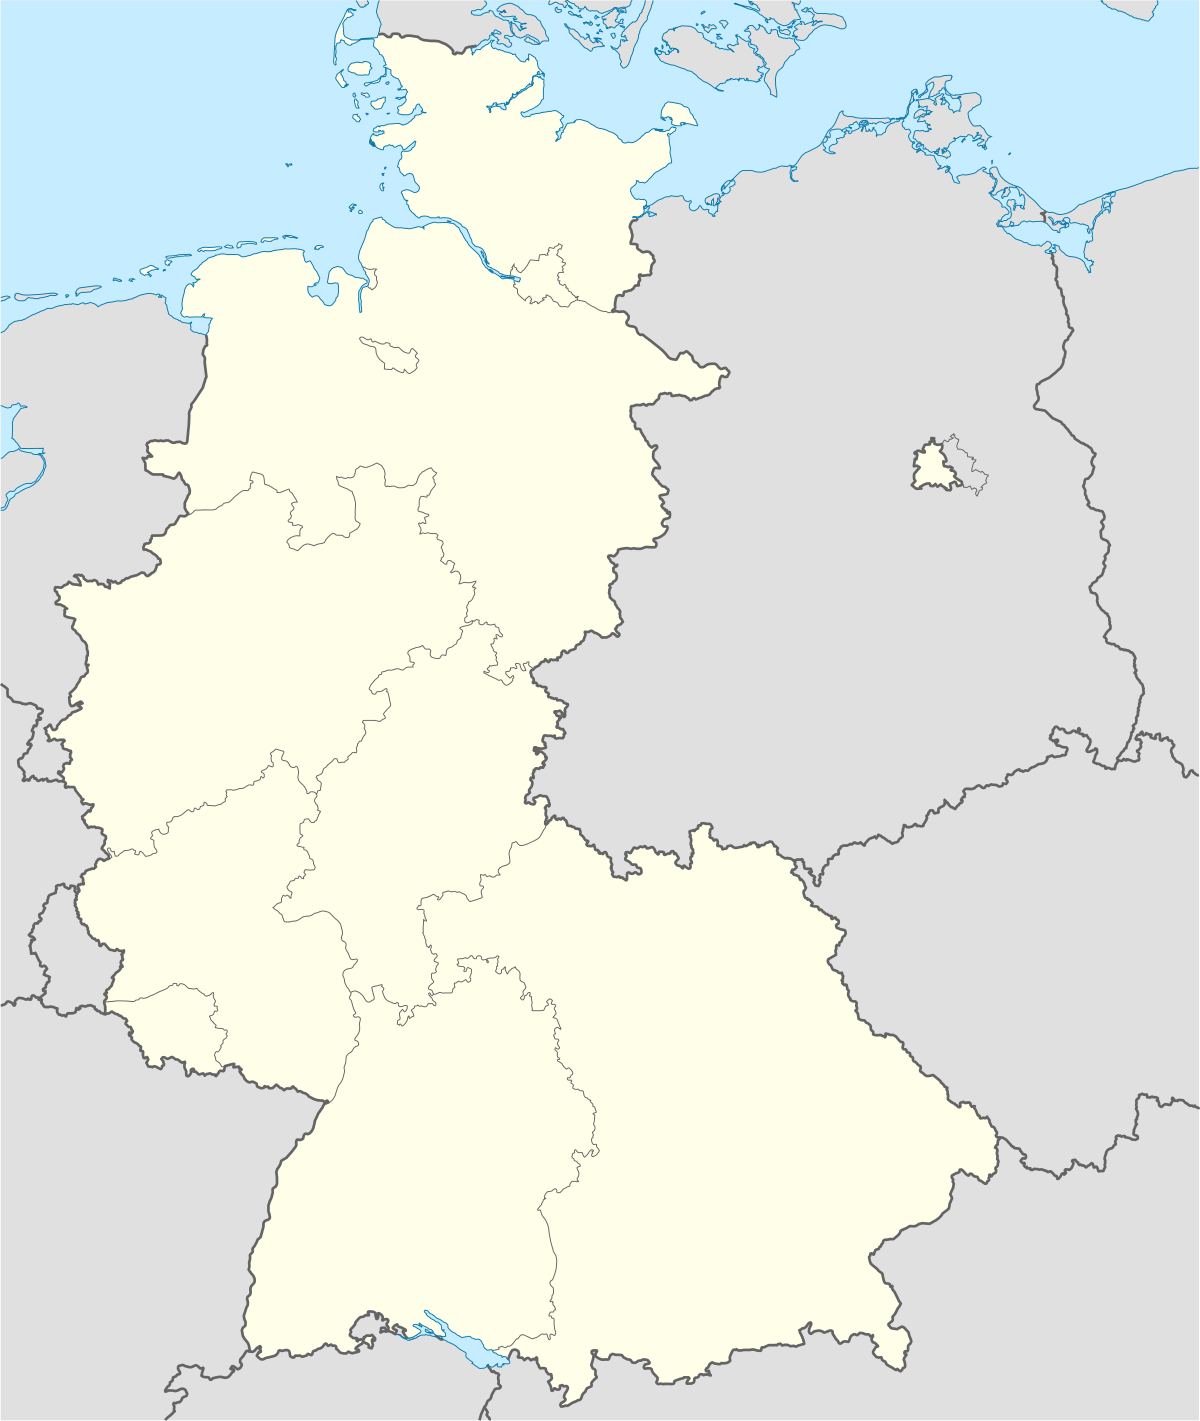 Noclador/sandbox/West Germany all NATO battalions in 1989 is located in FRG and West Berlin